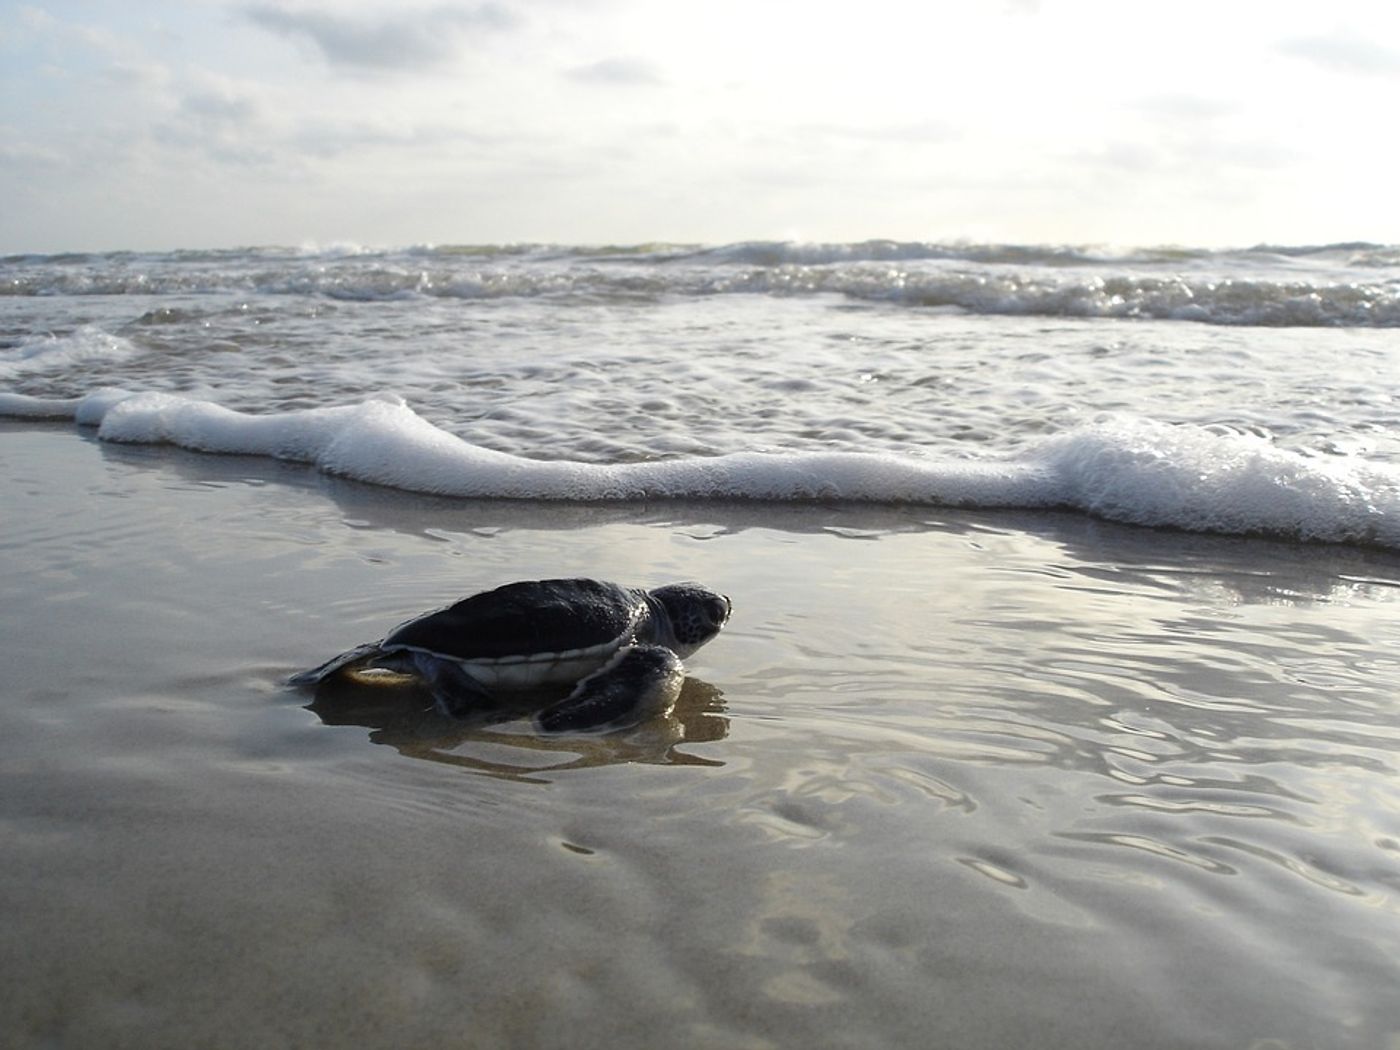 Green sea turtles take to the sand when they're ready to nest.